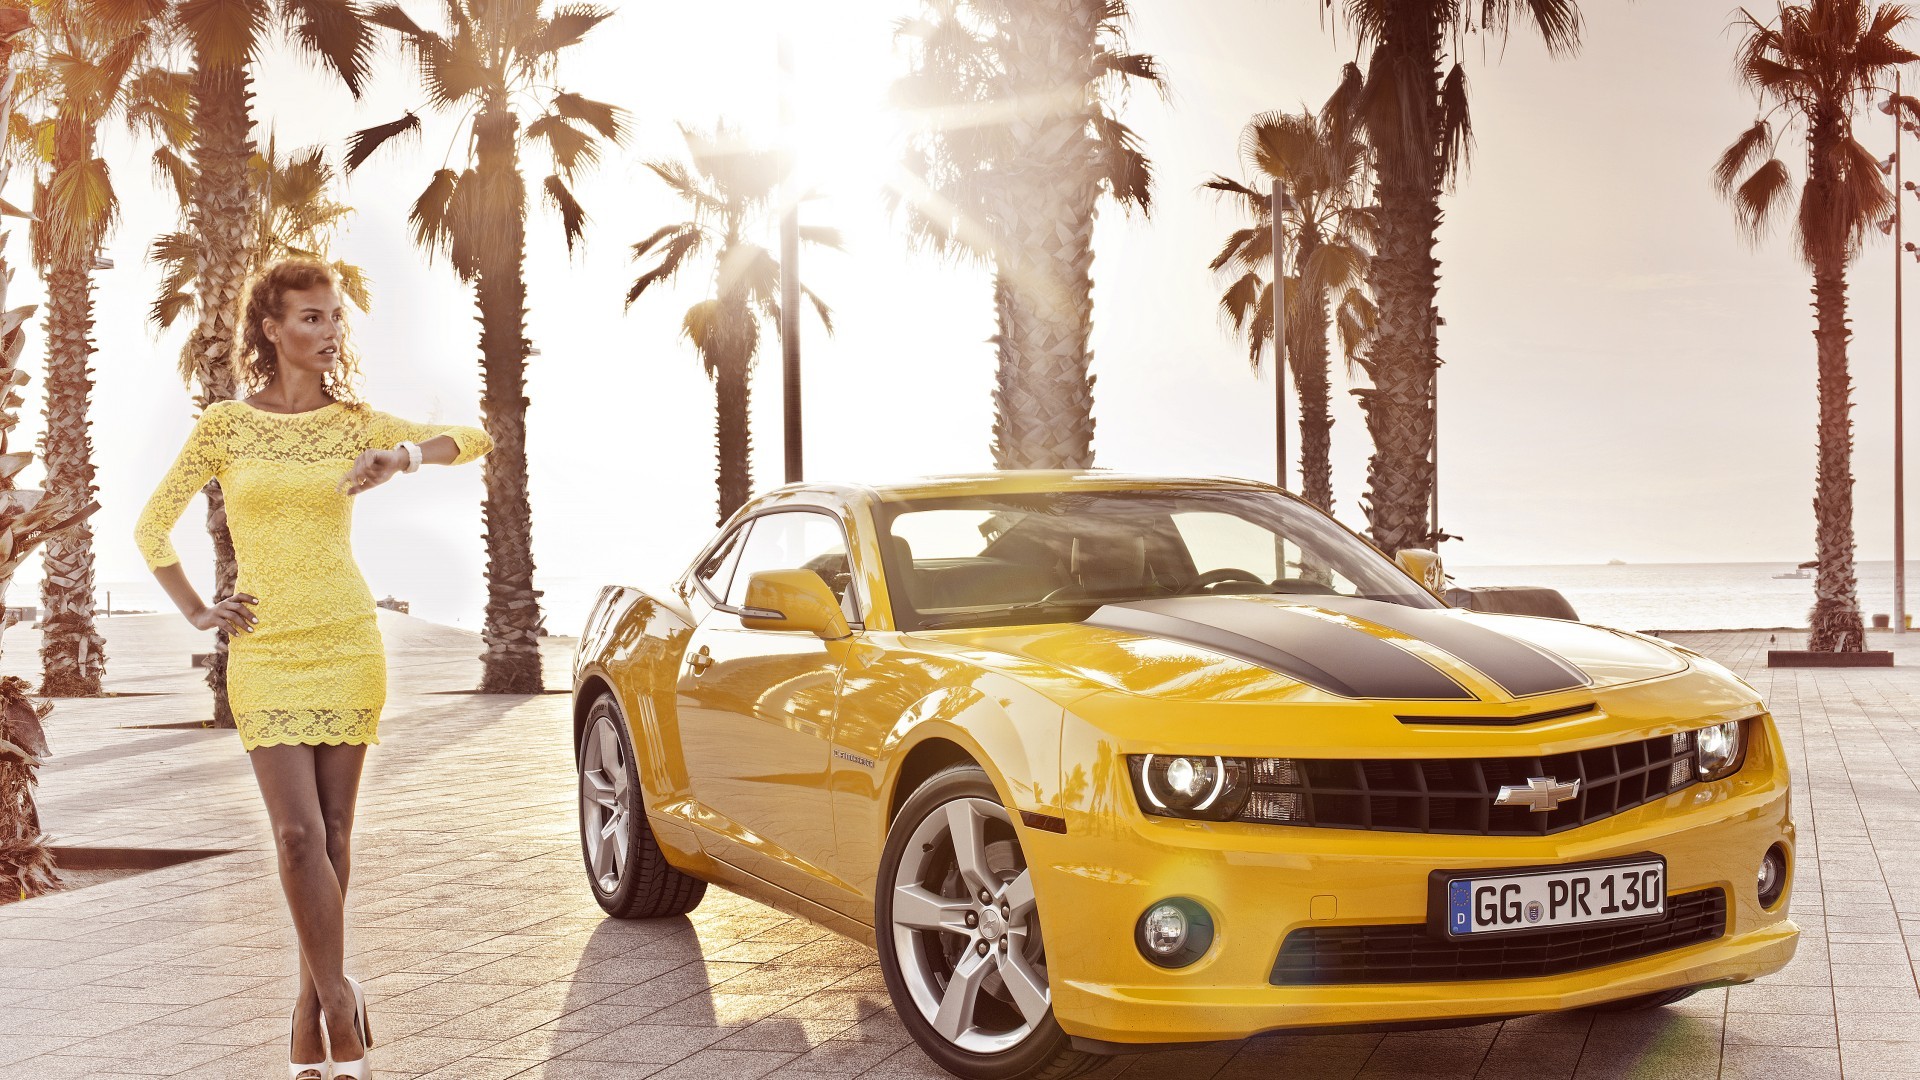 Camaro Car Palm Trees Women With Cars Yellow Dress Yellow Cars Chevrolet 1920x1080